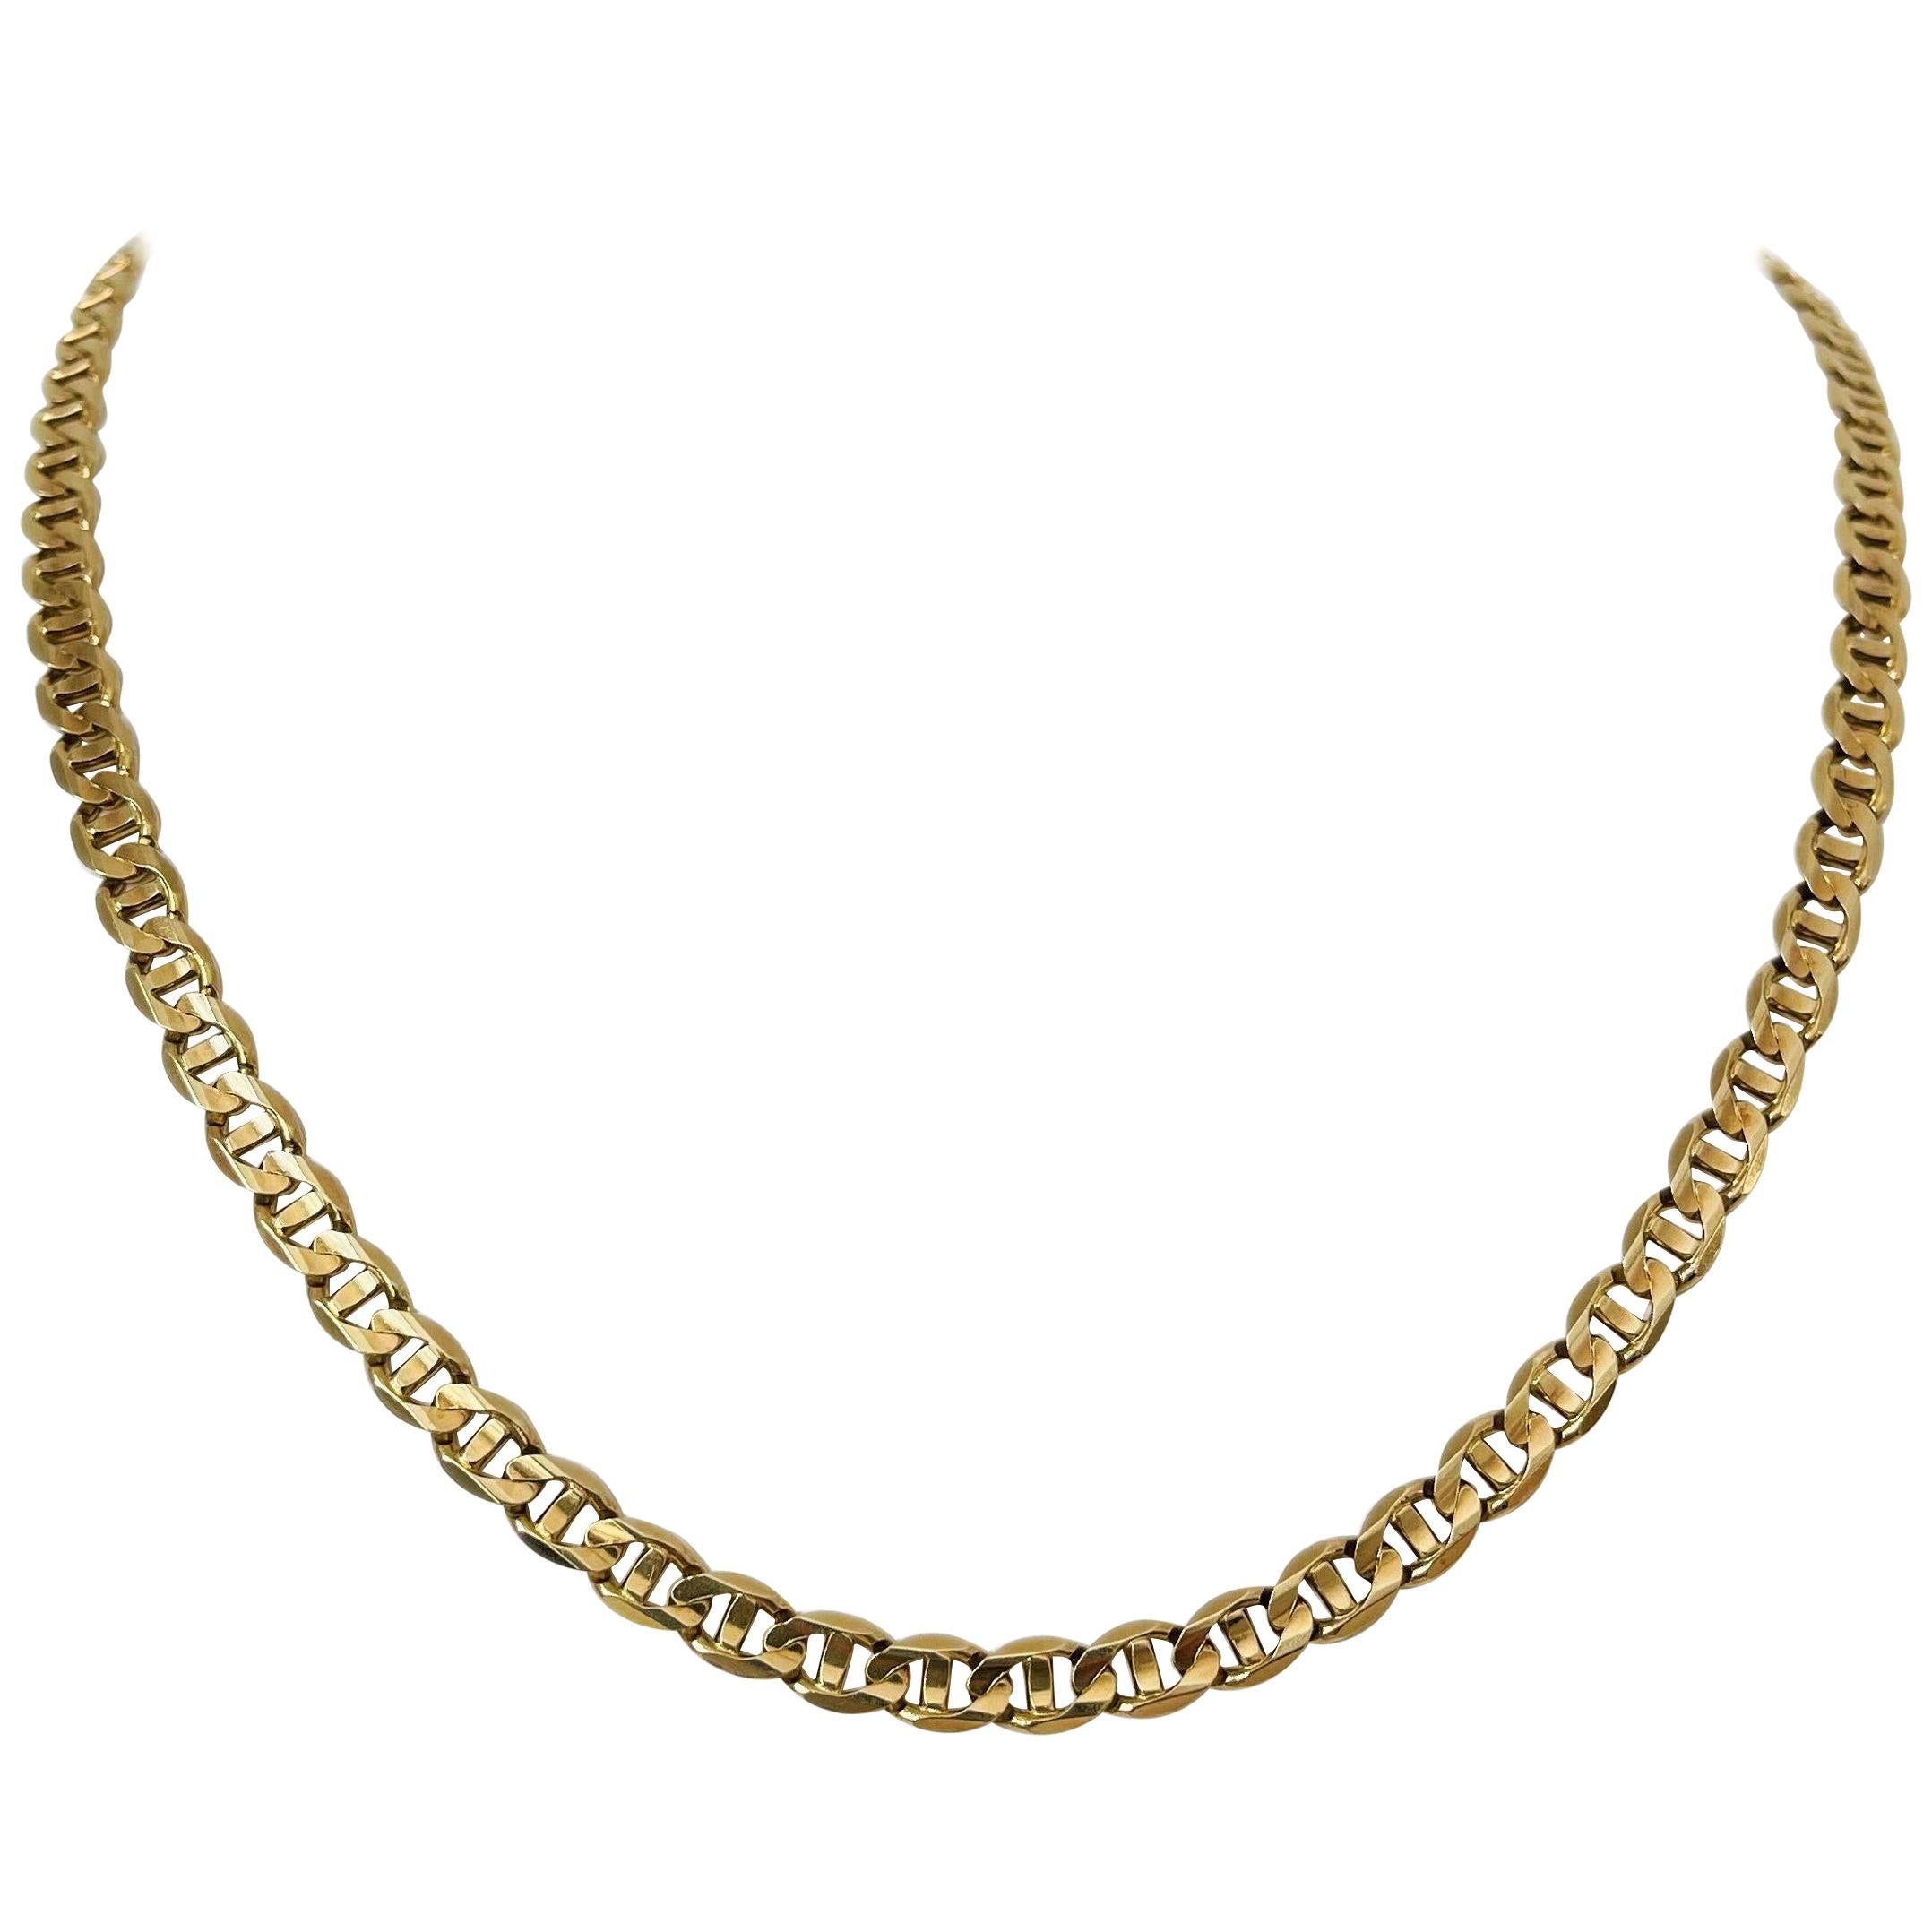 14 Karat Yellow Gold Solid Mariner Gucci Link Chain Necklace, Italy